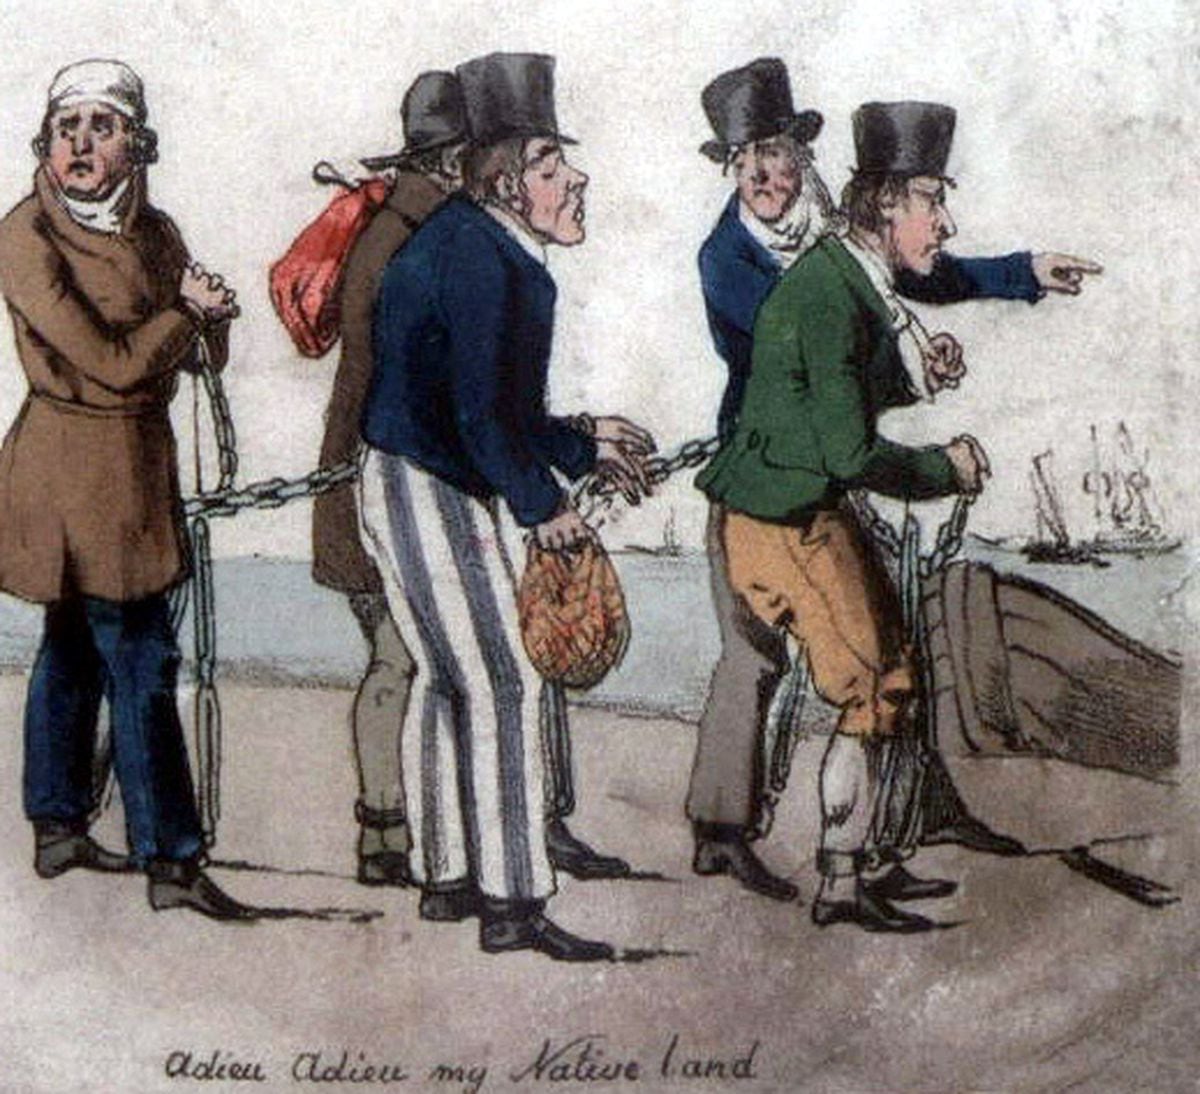 A cartoon depicting convicts being transported